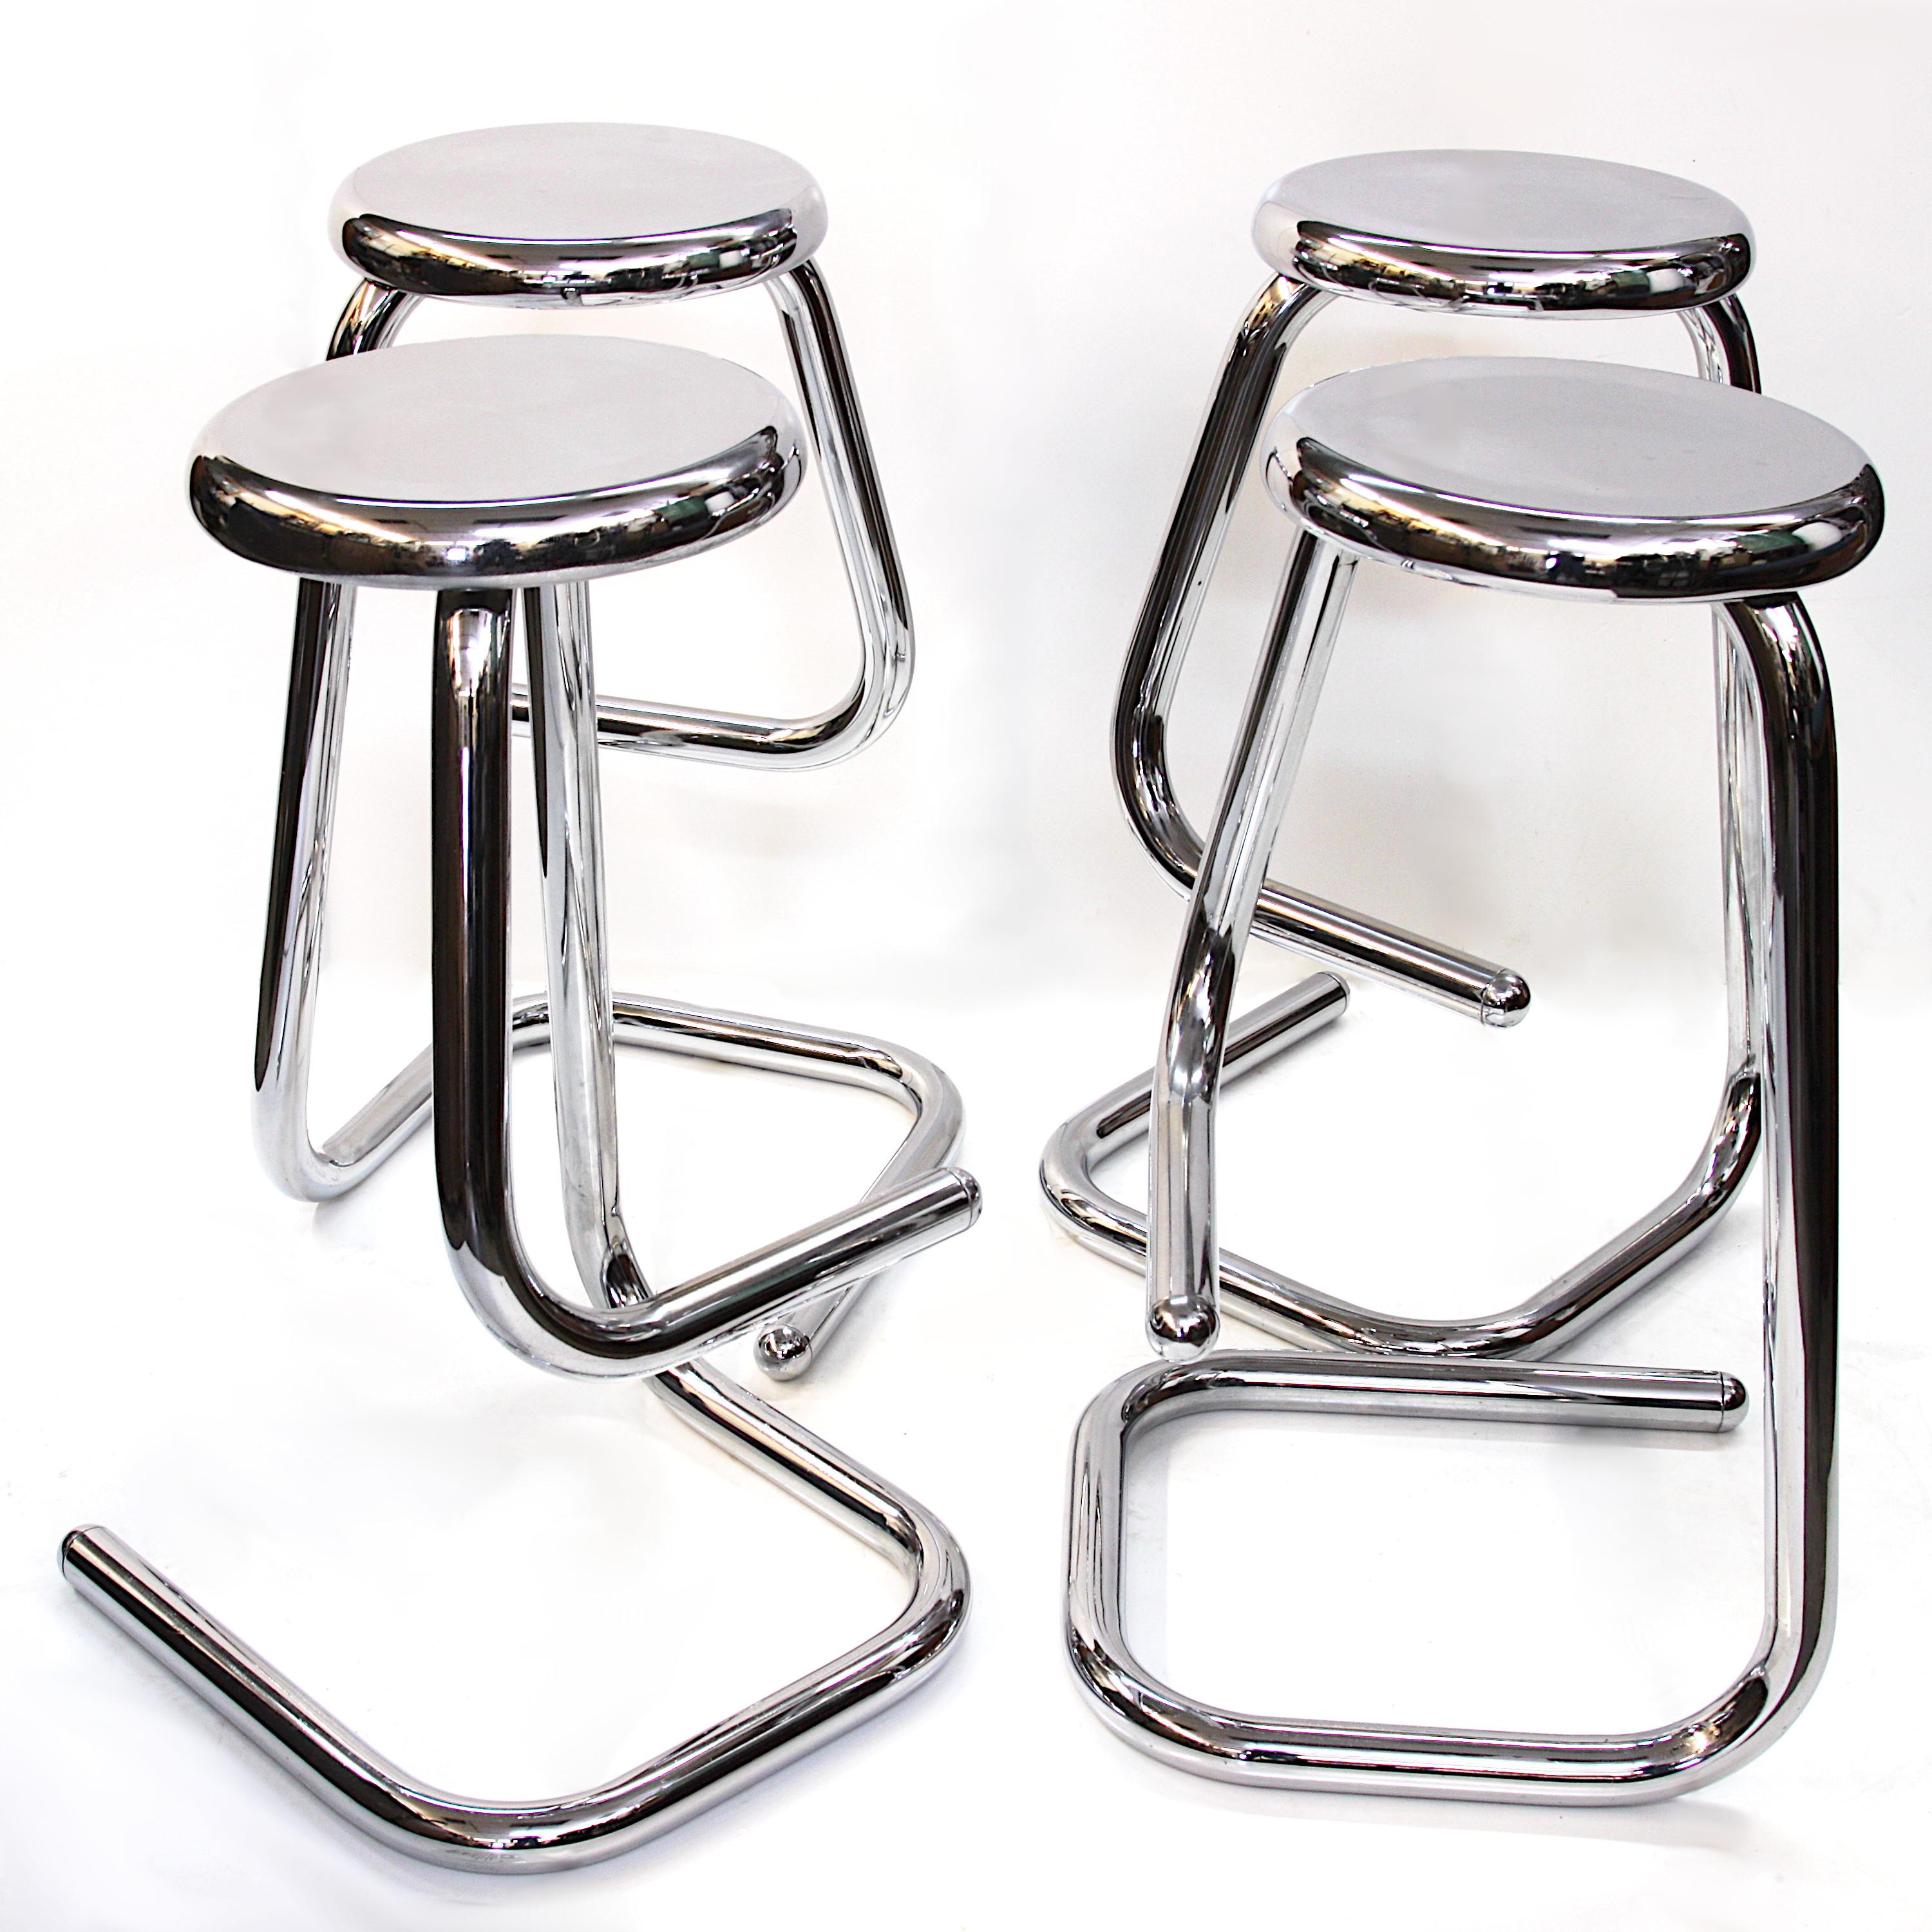 Mid century set of 4 chrome Paperclip bar stools for Kinetics. Designed by Phillip Salmon, Hugh Hamilton and Rein Soosalu, the K700 stool was first produced in 1969. It is the most famous design of Salmon & Hamilton’s three-year partnership and was